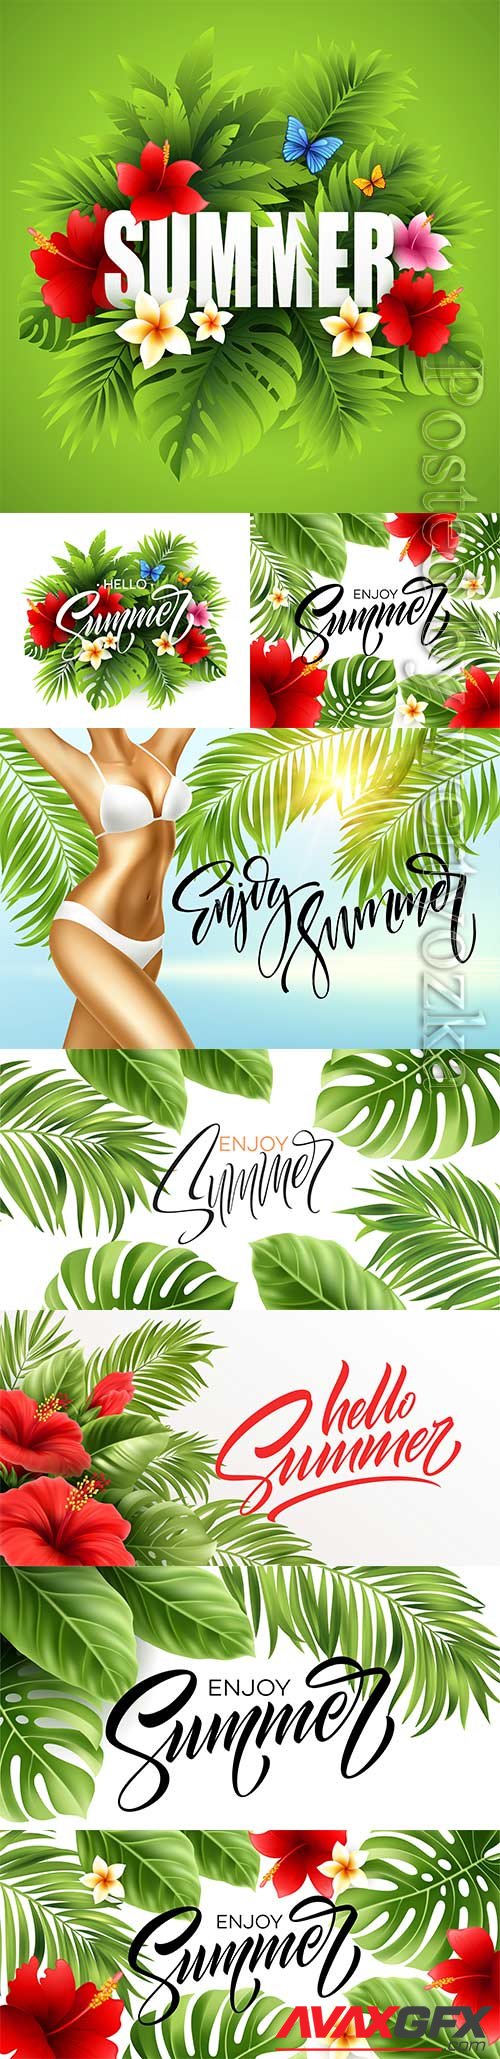 Summer poster with tropical palm leaf and handwriting lettering